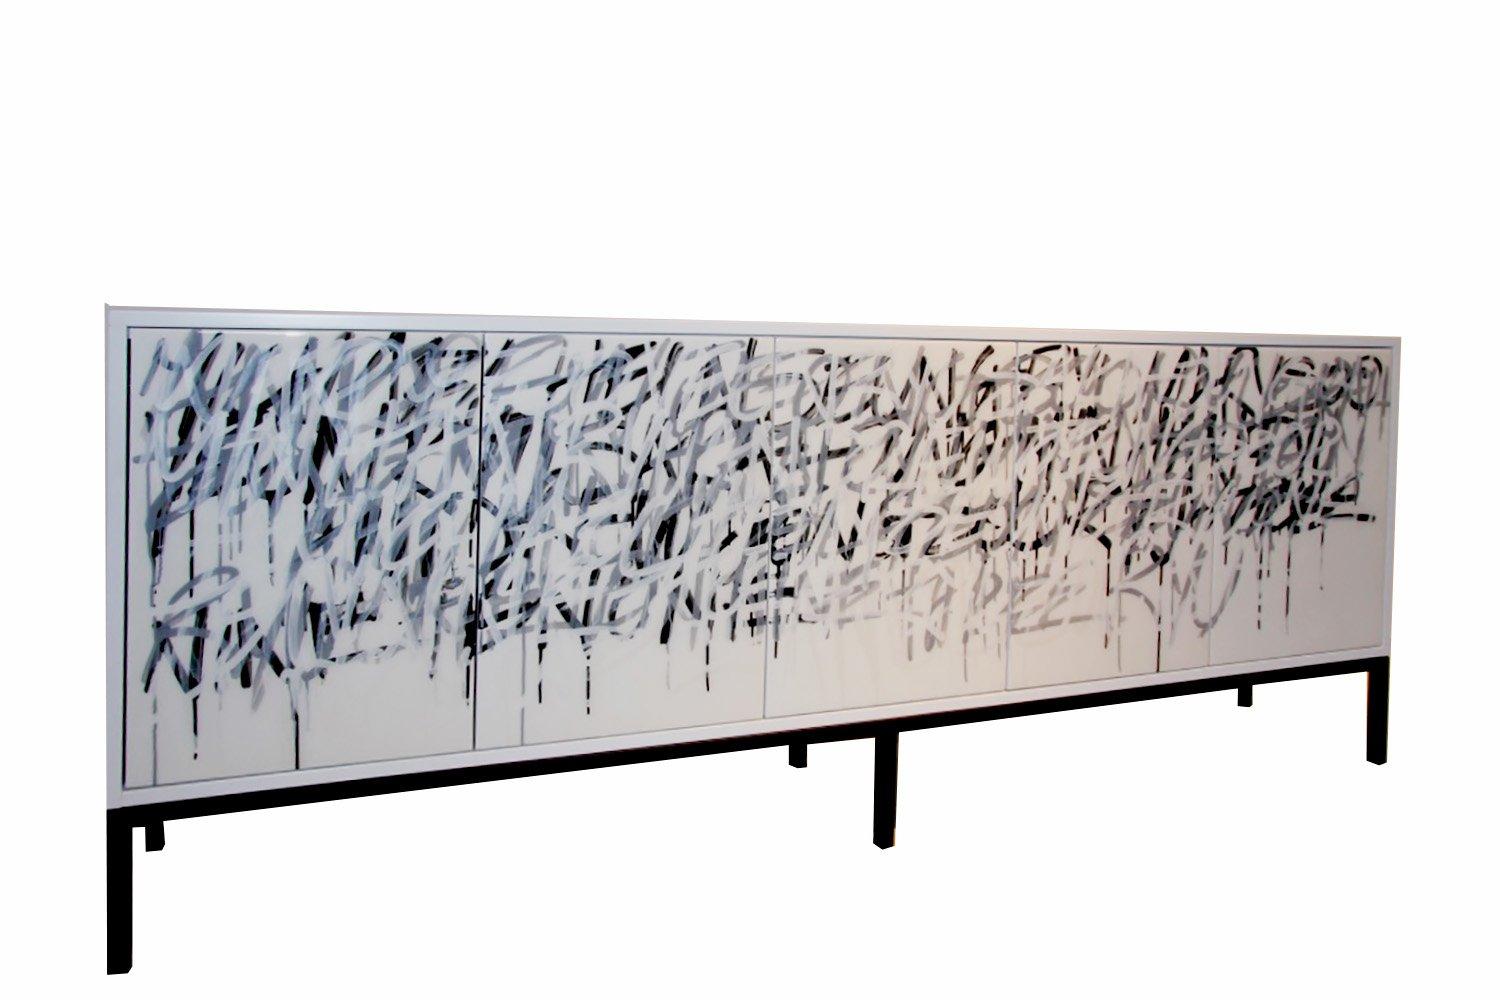 Hand-Painted White Graffiti Credenza by Morgan Clayhall